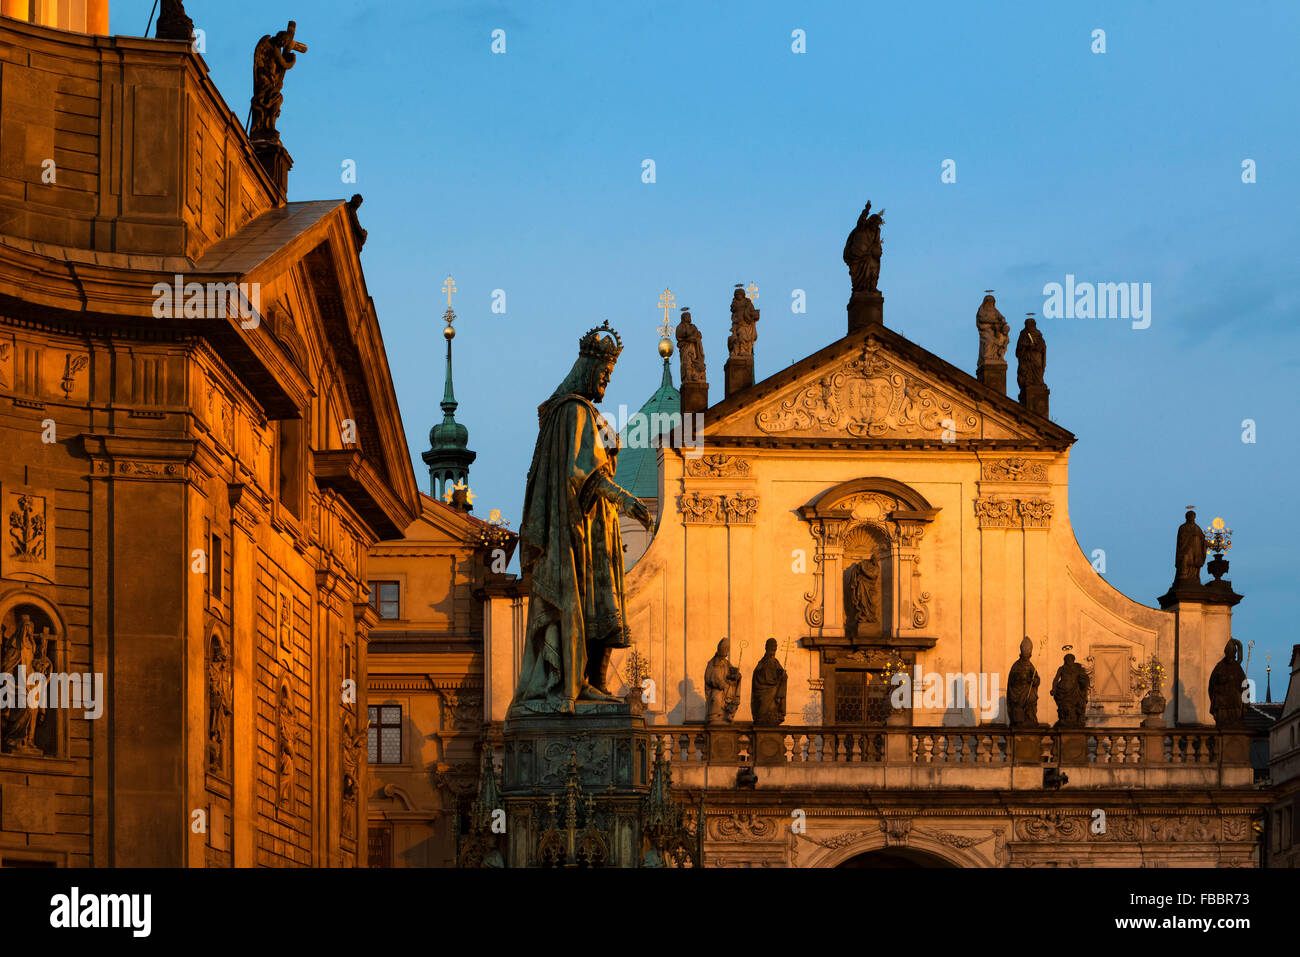 Church of St, Francis and Church of the Holy Saviour, Knights of the Cross Square, Old Town, Prague, Czech Republic, Stock Photo